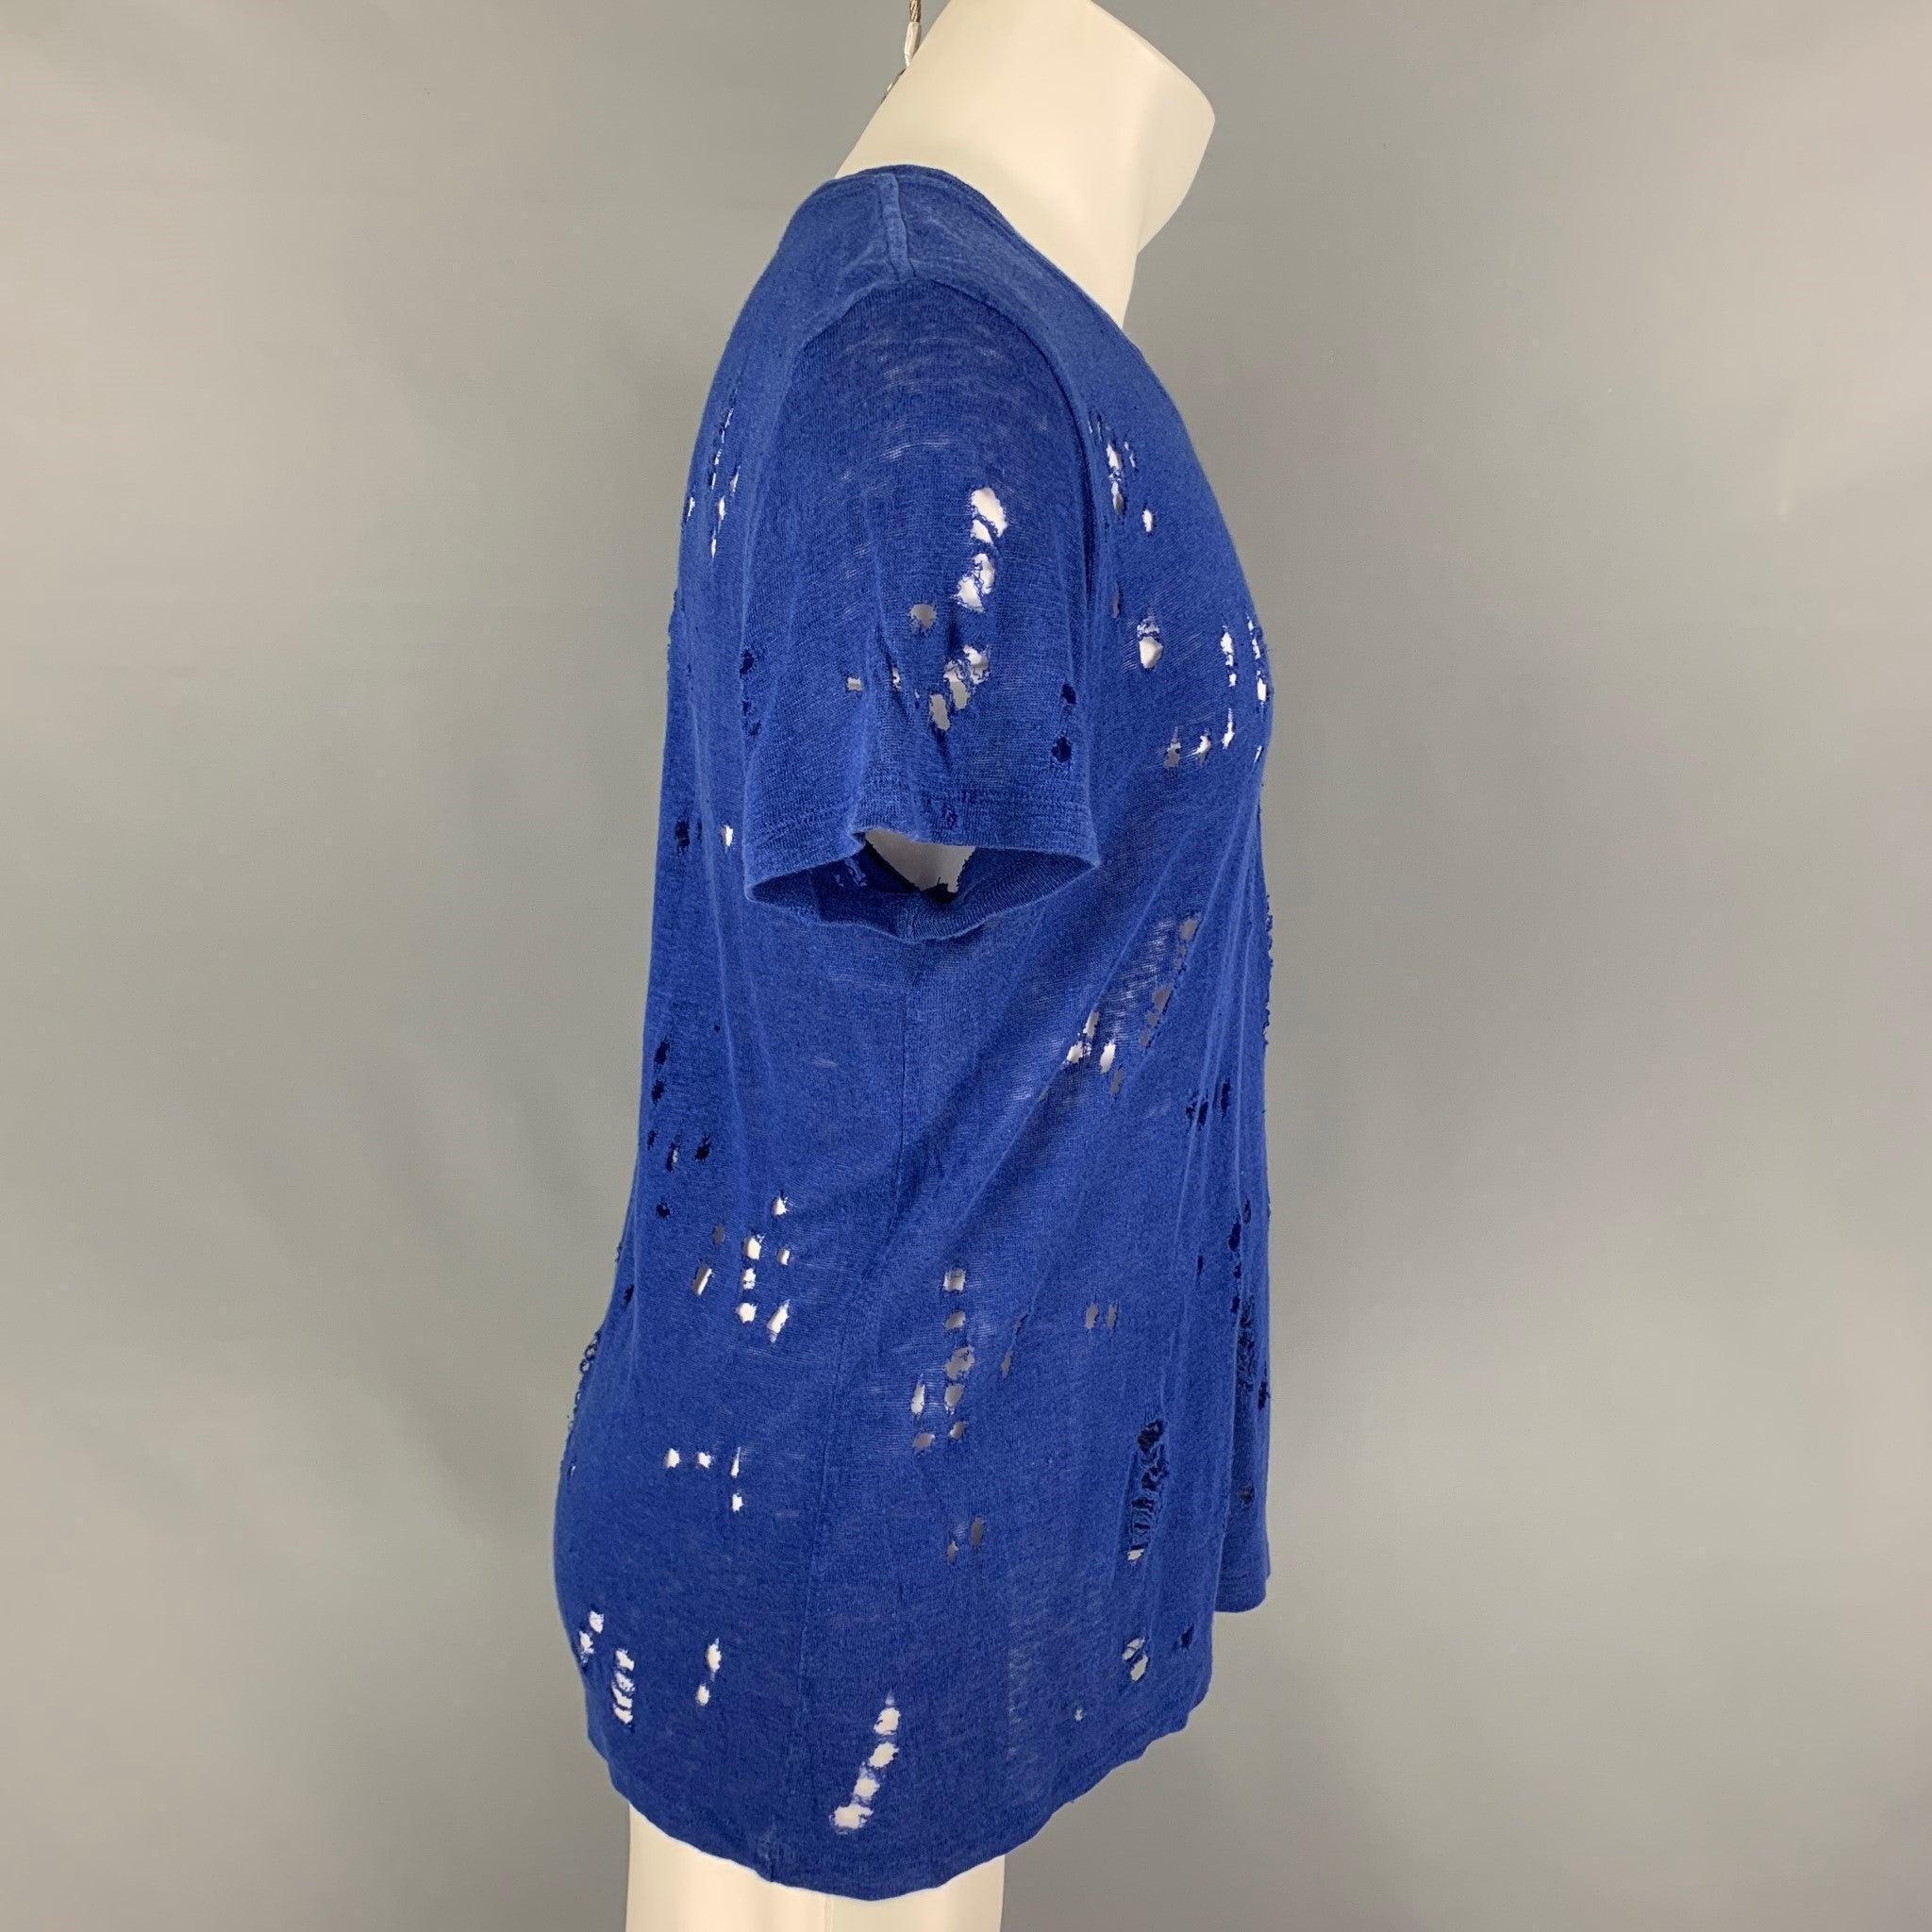 IRO 'Clay' t-shirt comes in a royal blue linen featuring distressed details throughout and a crew-neck. Made in Portugal.
Very Good Pre-Owned Condition.  

Marked:   XS 

Measurements: 
 
Shoulder: 17 inches  Chest: 36 inches  Sleeve: 7.5 inches